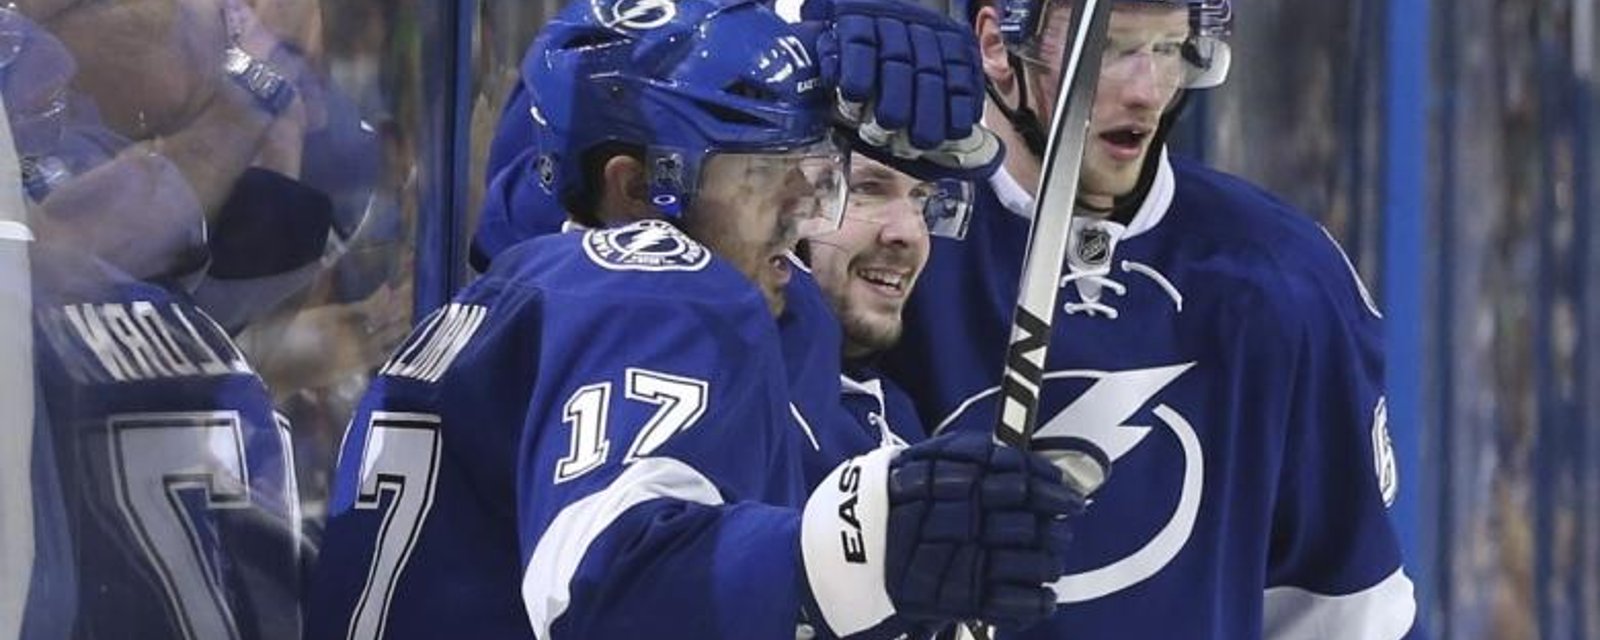 Video: Kucherov wastes little time and scores the first goal of the playoffs.